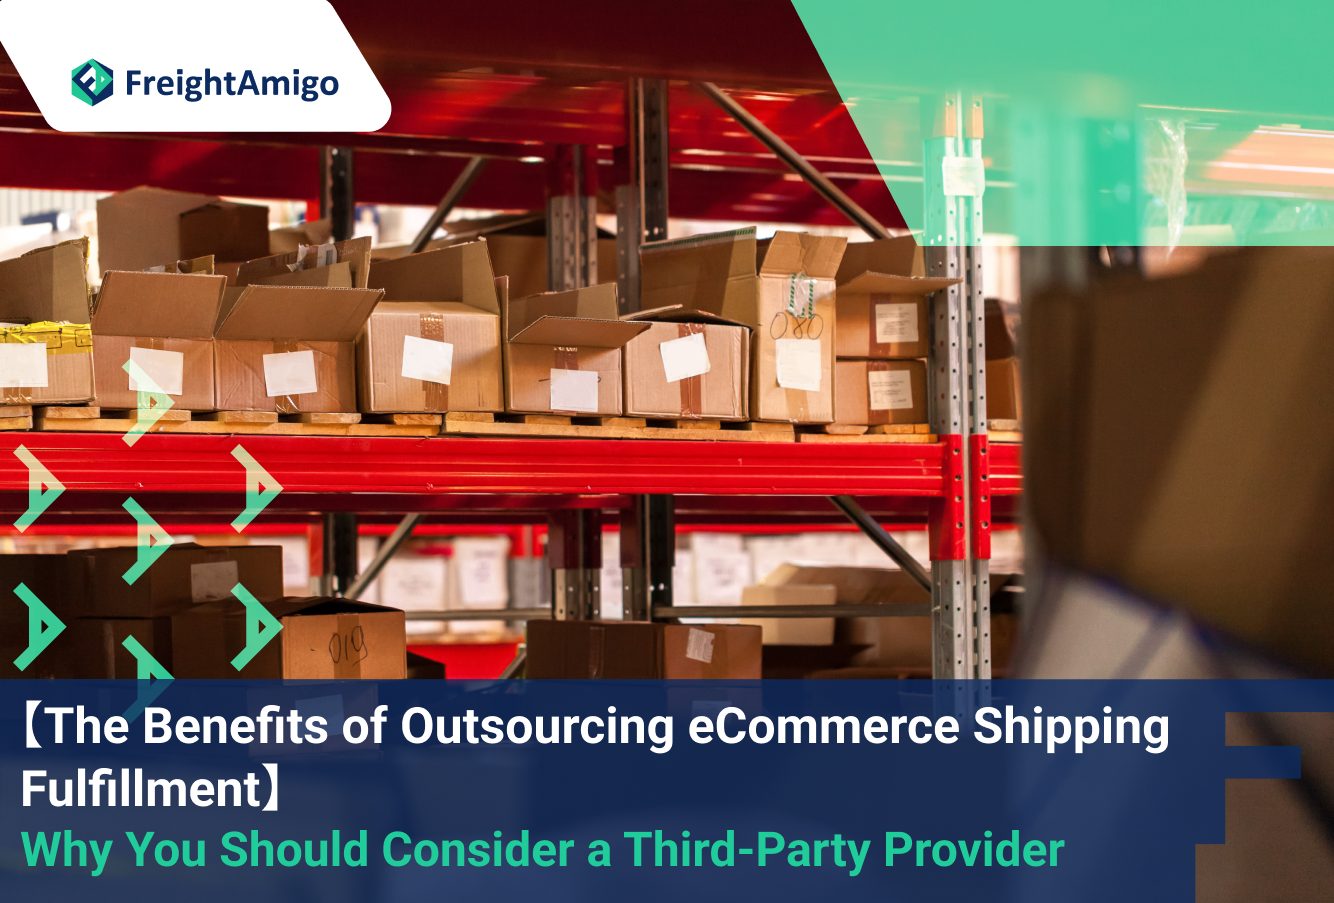 The Benefits of Outsourcing eCommerce Shipping Fulfillment: Why You Should Consider a Third-Party Provider